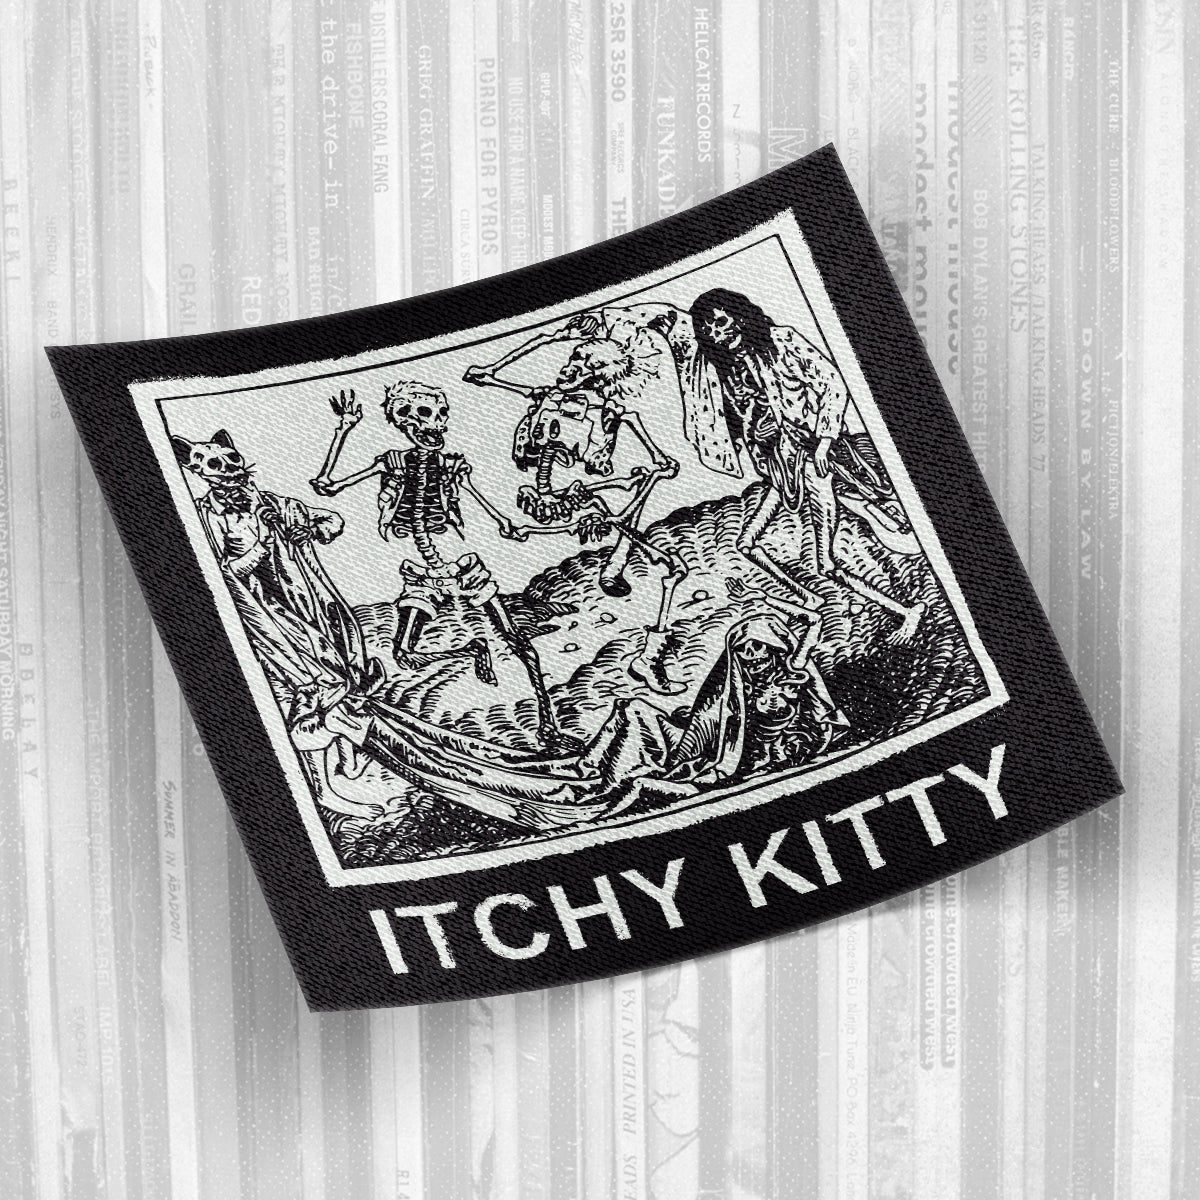 Itchy Kitty - Buckles; canvas backpatch